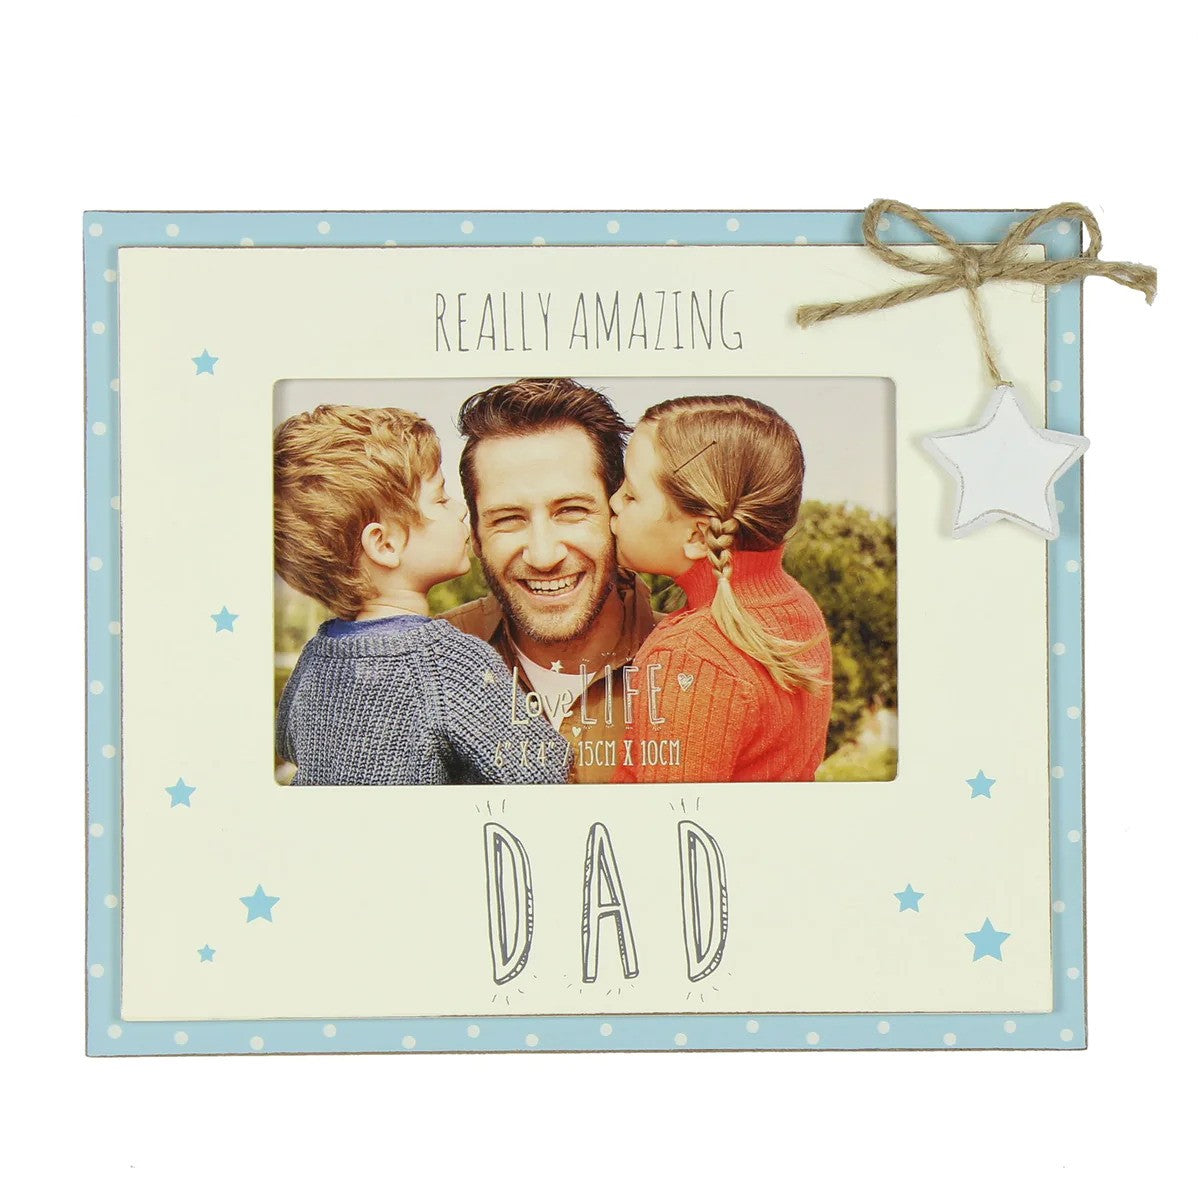 Blue and white picture frame with text reading "REALLY AMAZING DAD"